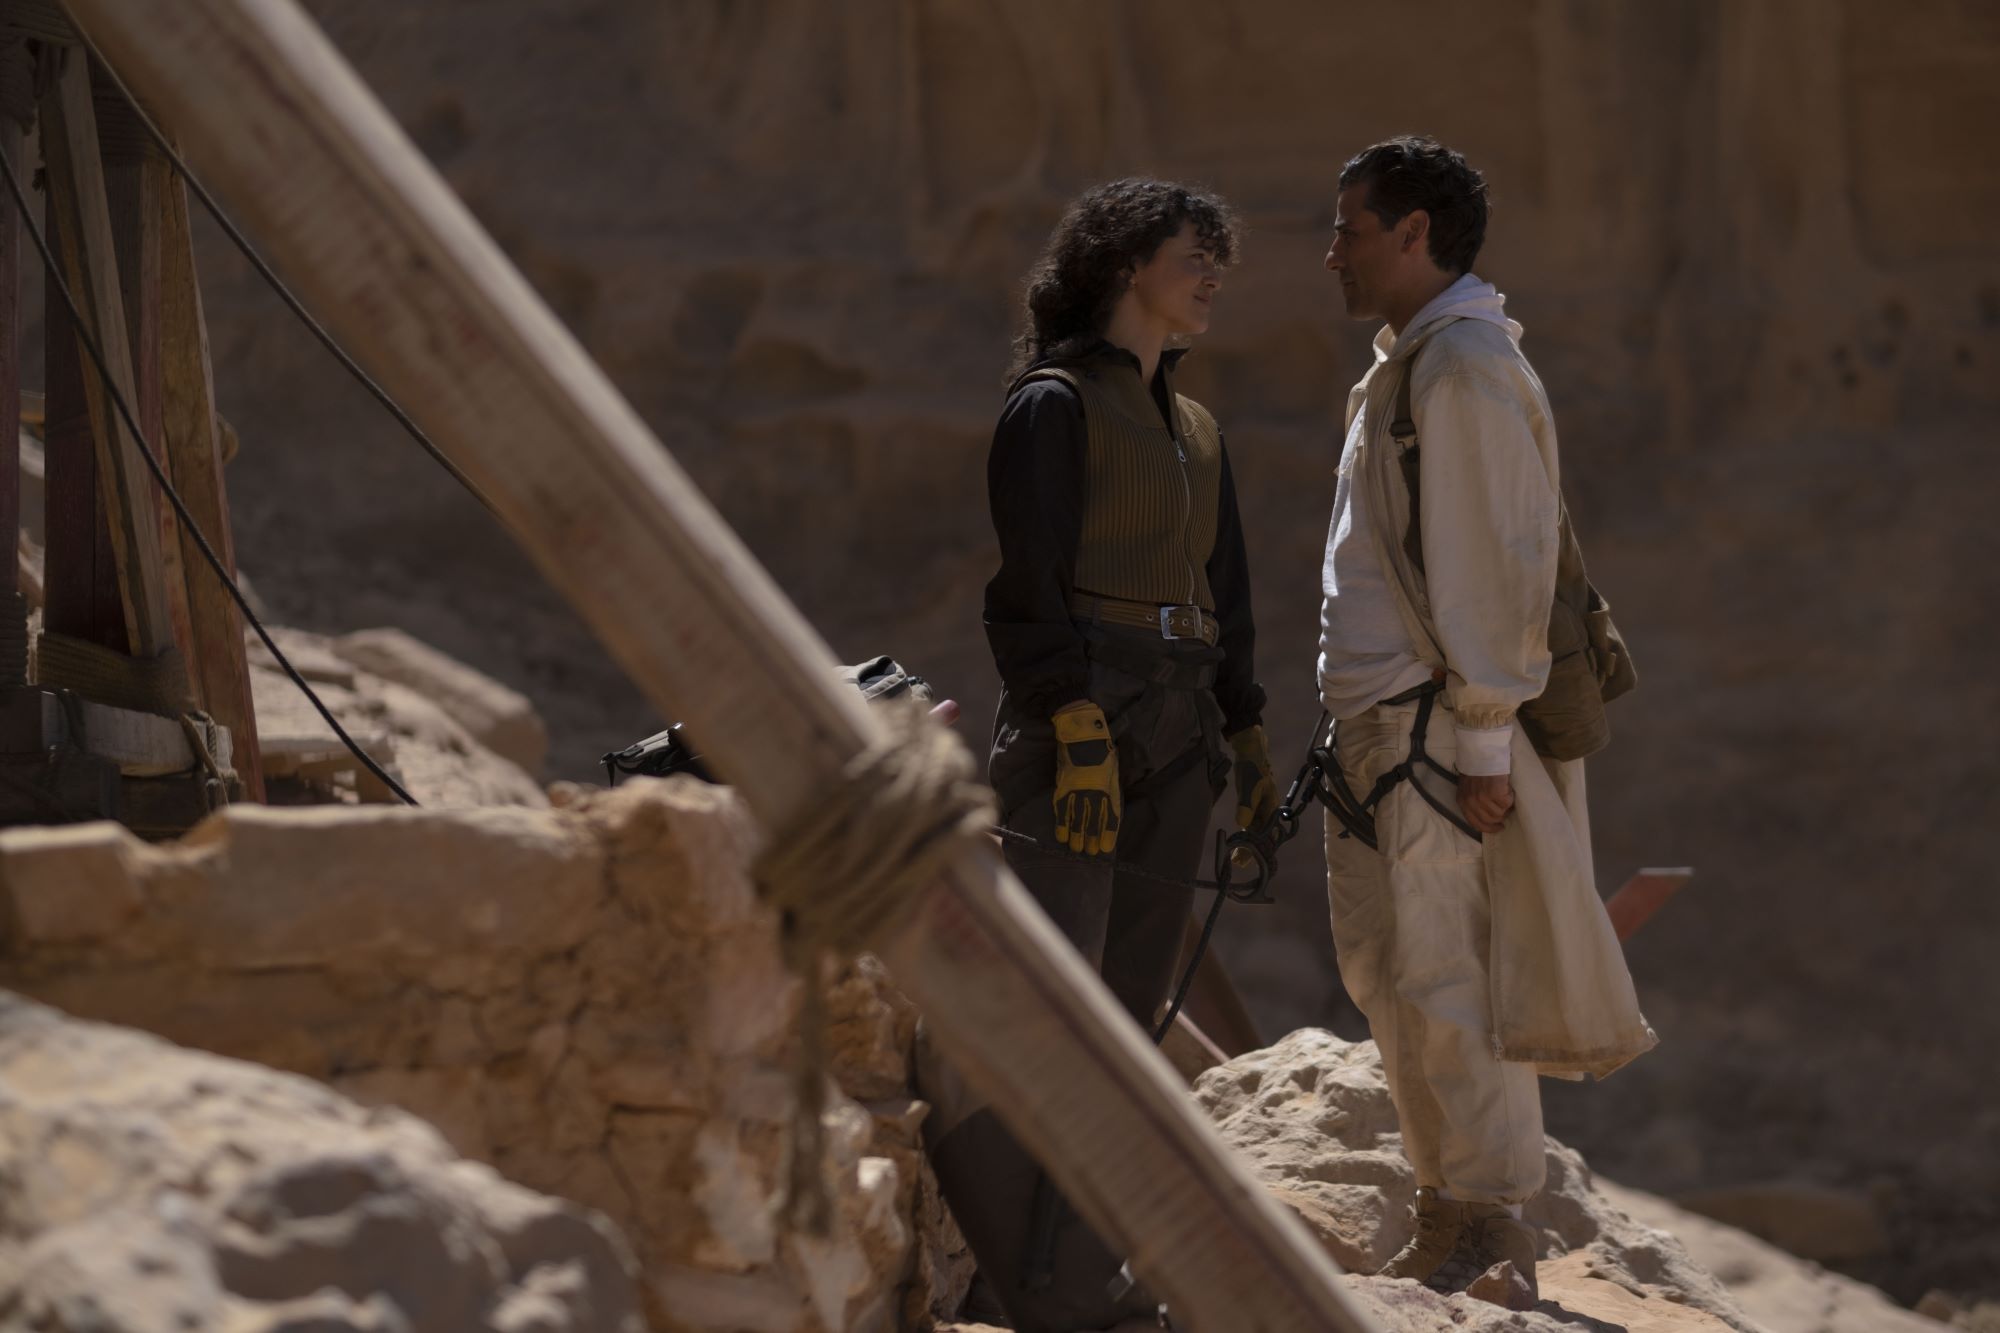 'Moon Knight' stars May Calamawy and Oscar Isaac, in character as Layla El-Faouly and Marc Spector, share a scene in a rocky terrain. Layla wears a brown vest over a black jacket and black pants. Marc wears a long white jacket over a white hoodie and white pants.